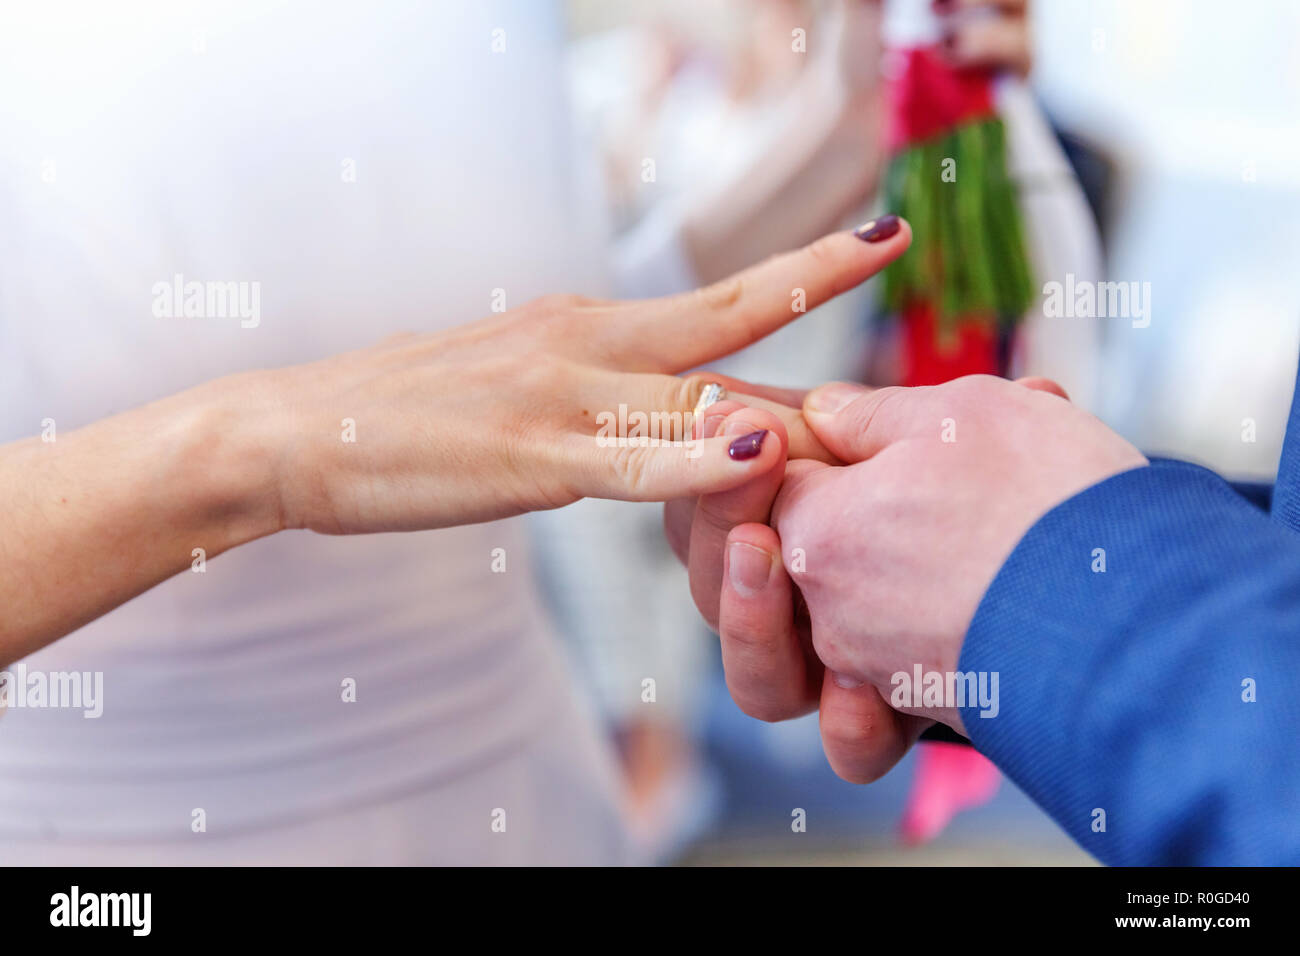 Bride and groom marriage hands with wedding rings. Groom hand putting wedding ring on bride finger. Declaration of love, spring. Wedding card greeting. Wedding day moments ceremony details Stock Photo